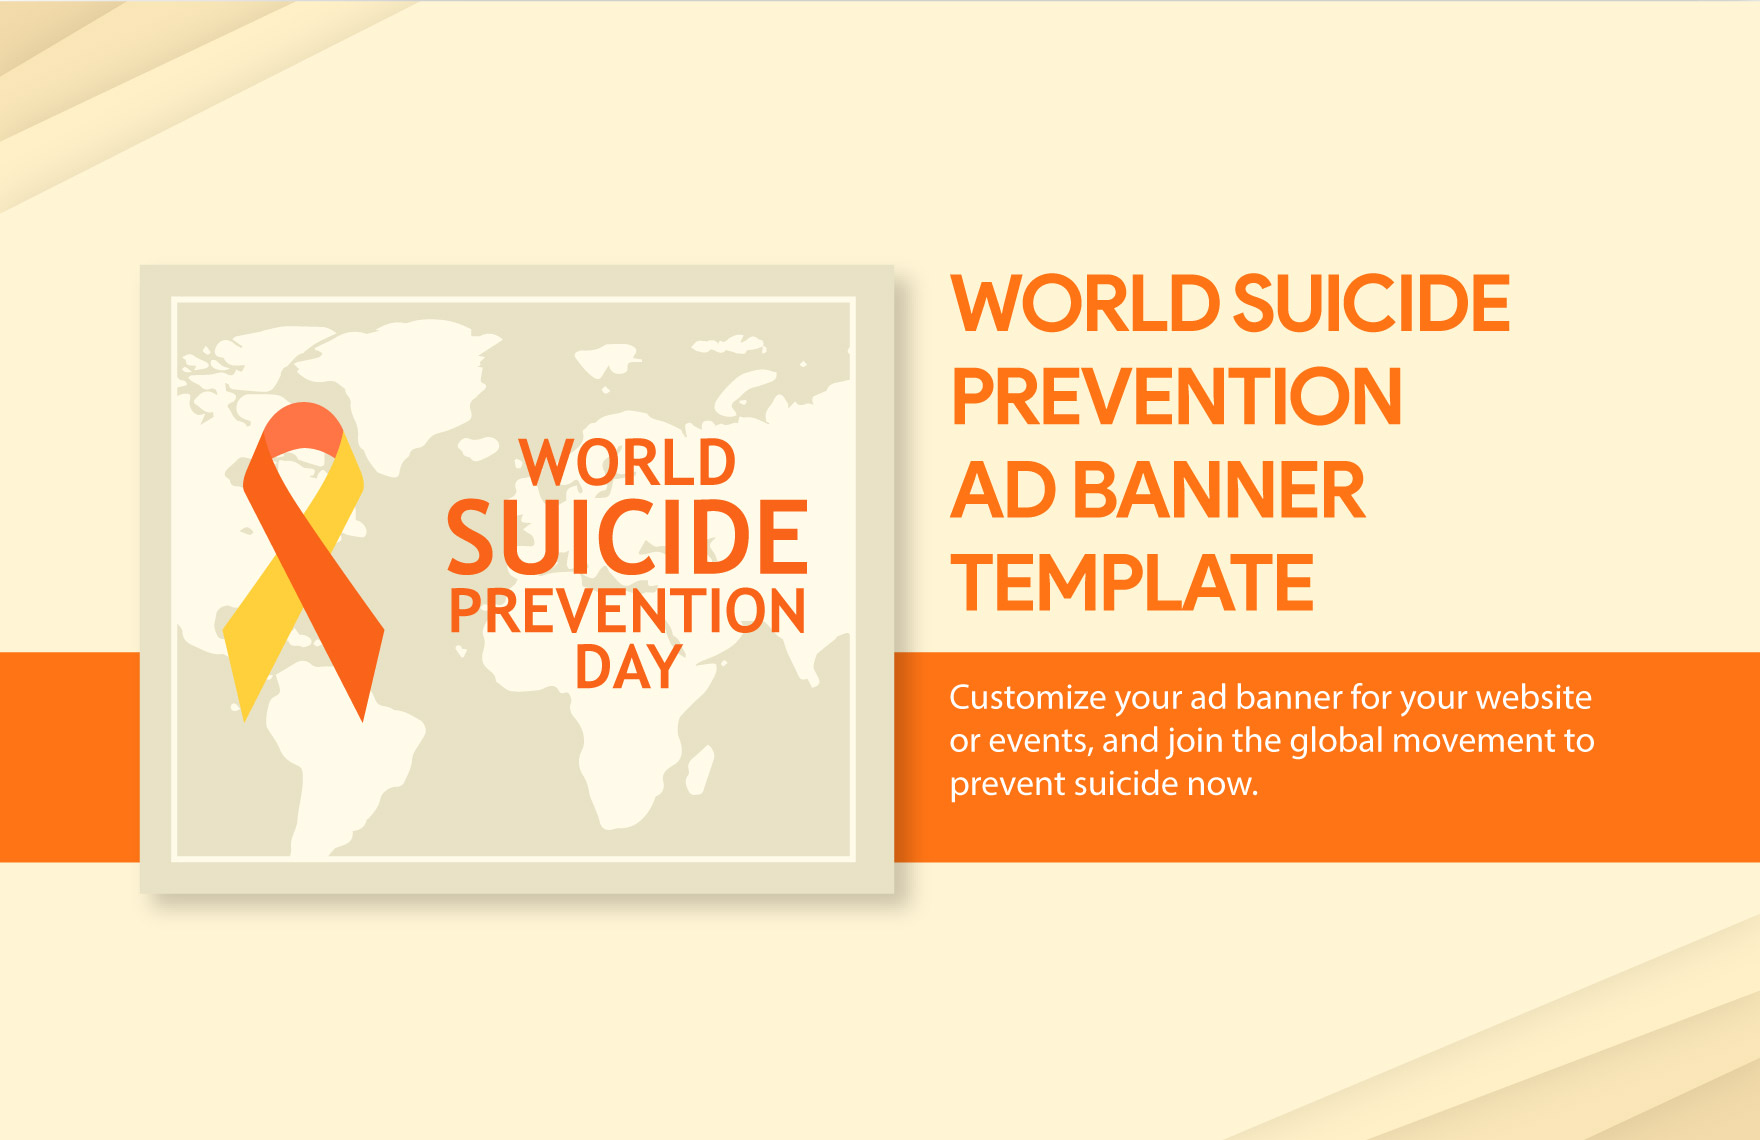 Free World Suicide Prevention Day Ad Banner Template in Illustrator, PSD, PNG